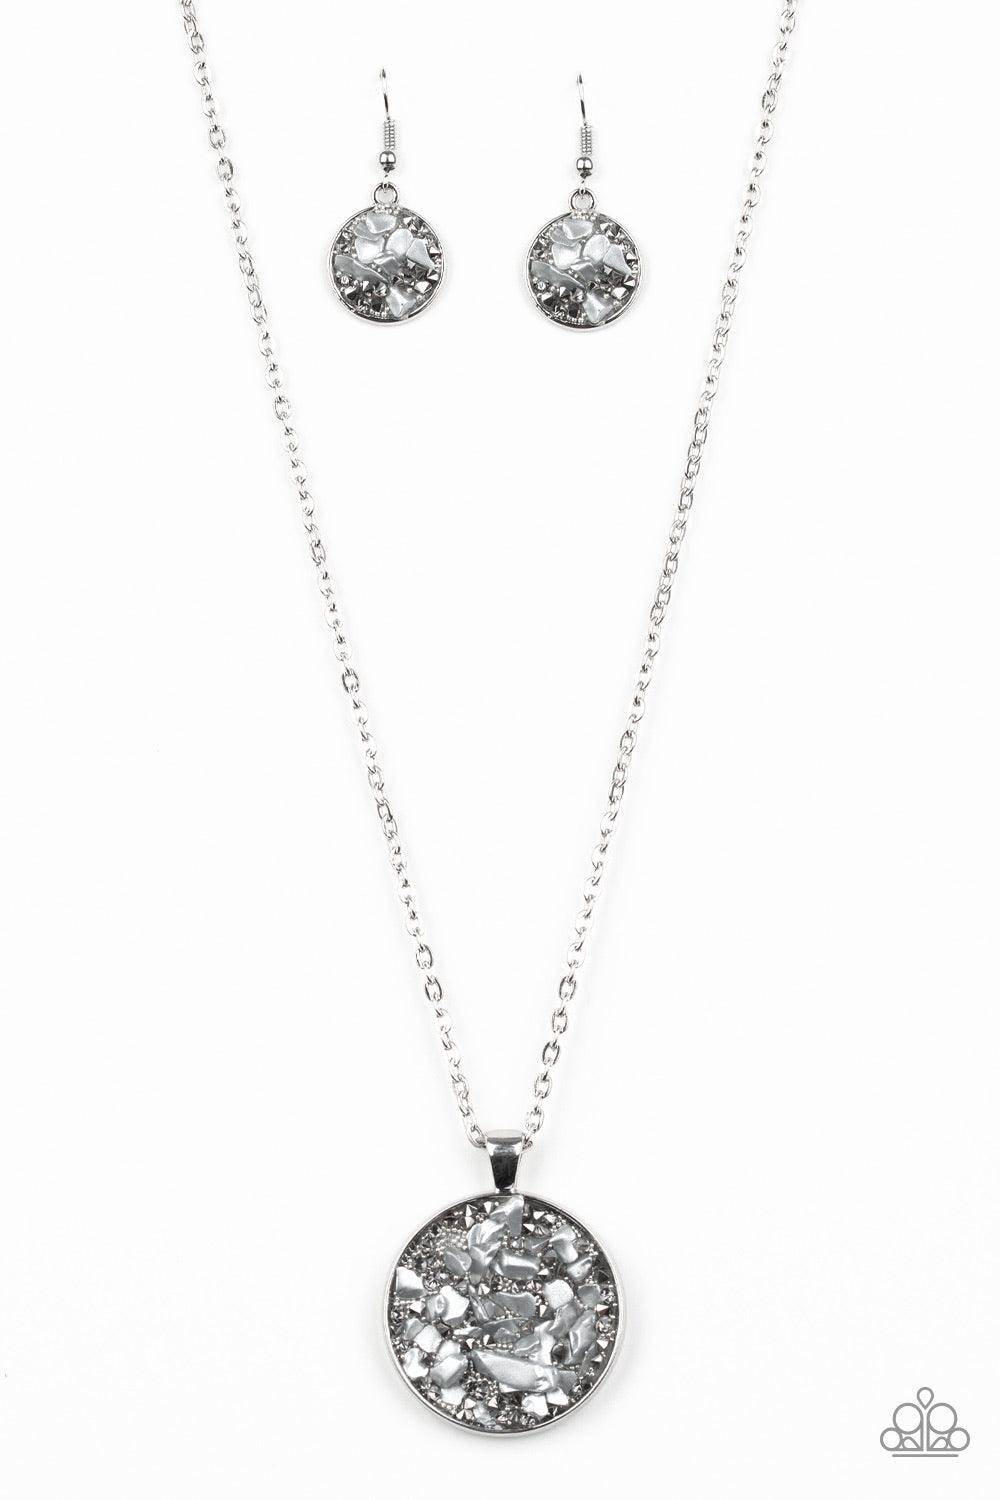 Paparazzi Accessories GLAM Crush Monday - Silver Infused with smoky and glassy rhinestone prisms, bits of metallic rock and dainty silver beads are sprinkled along the center of a round silver frame, creating a glittering pendant below the collar. Feature